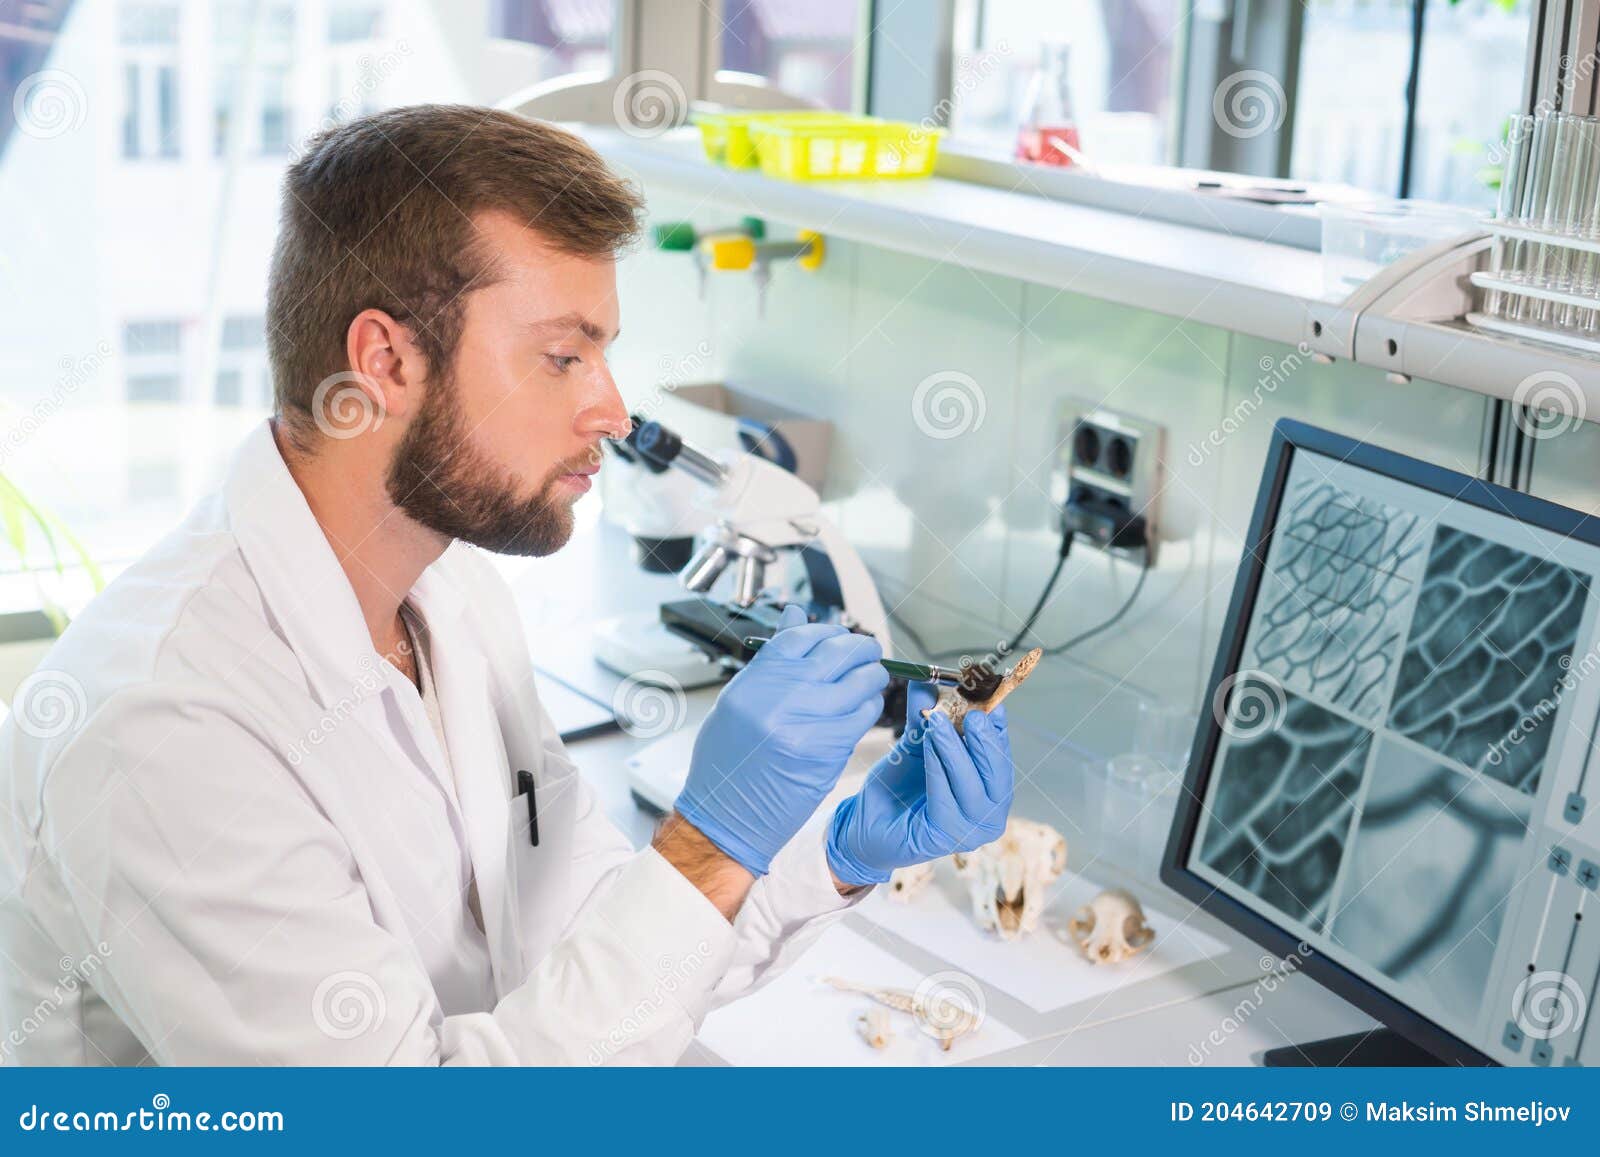 archaeologist working in natural research lab. laboratory assistant cleaning animal bones. archaeology, zoology